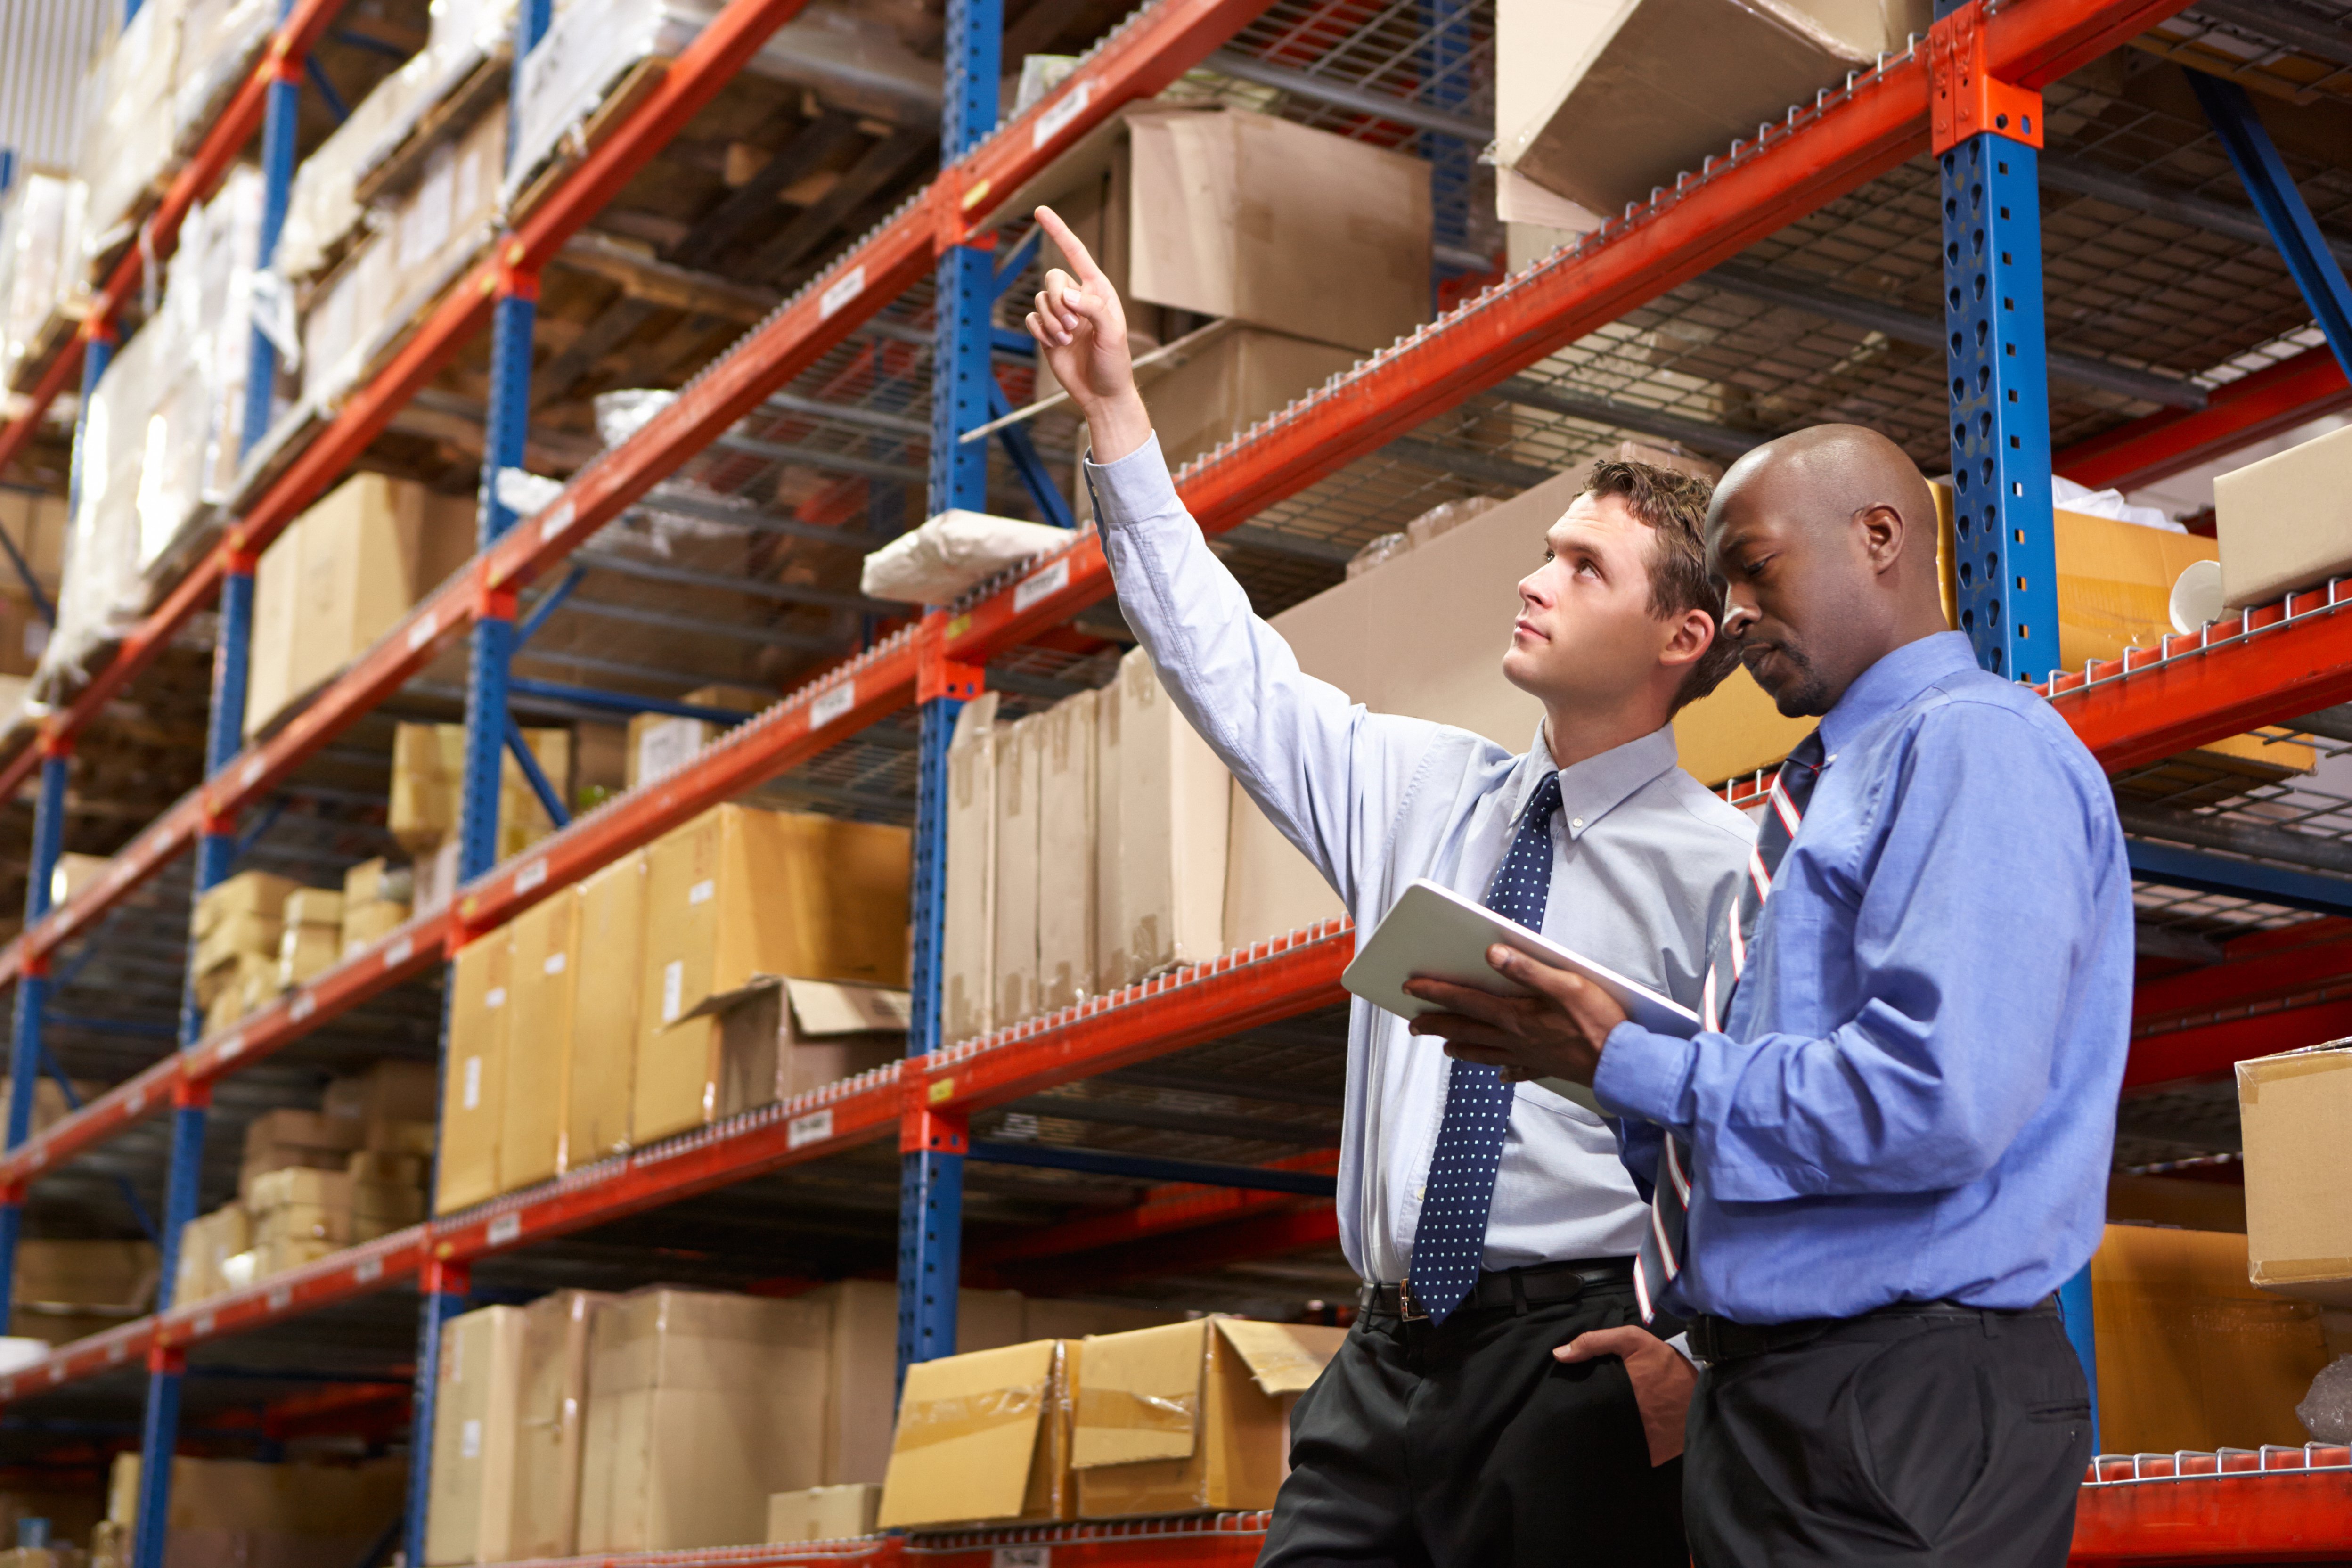 Supplier takes notes as his new client point to items in warehouse inventory